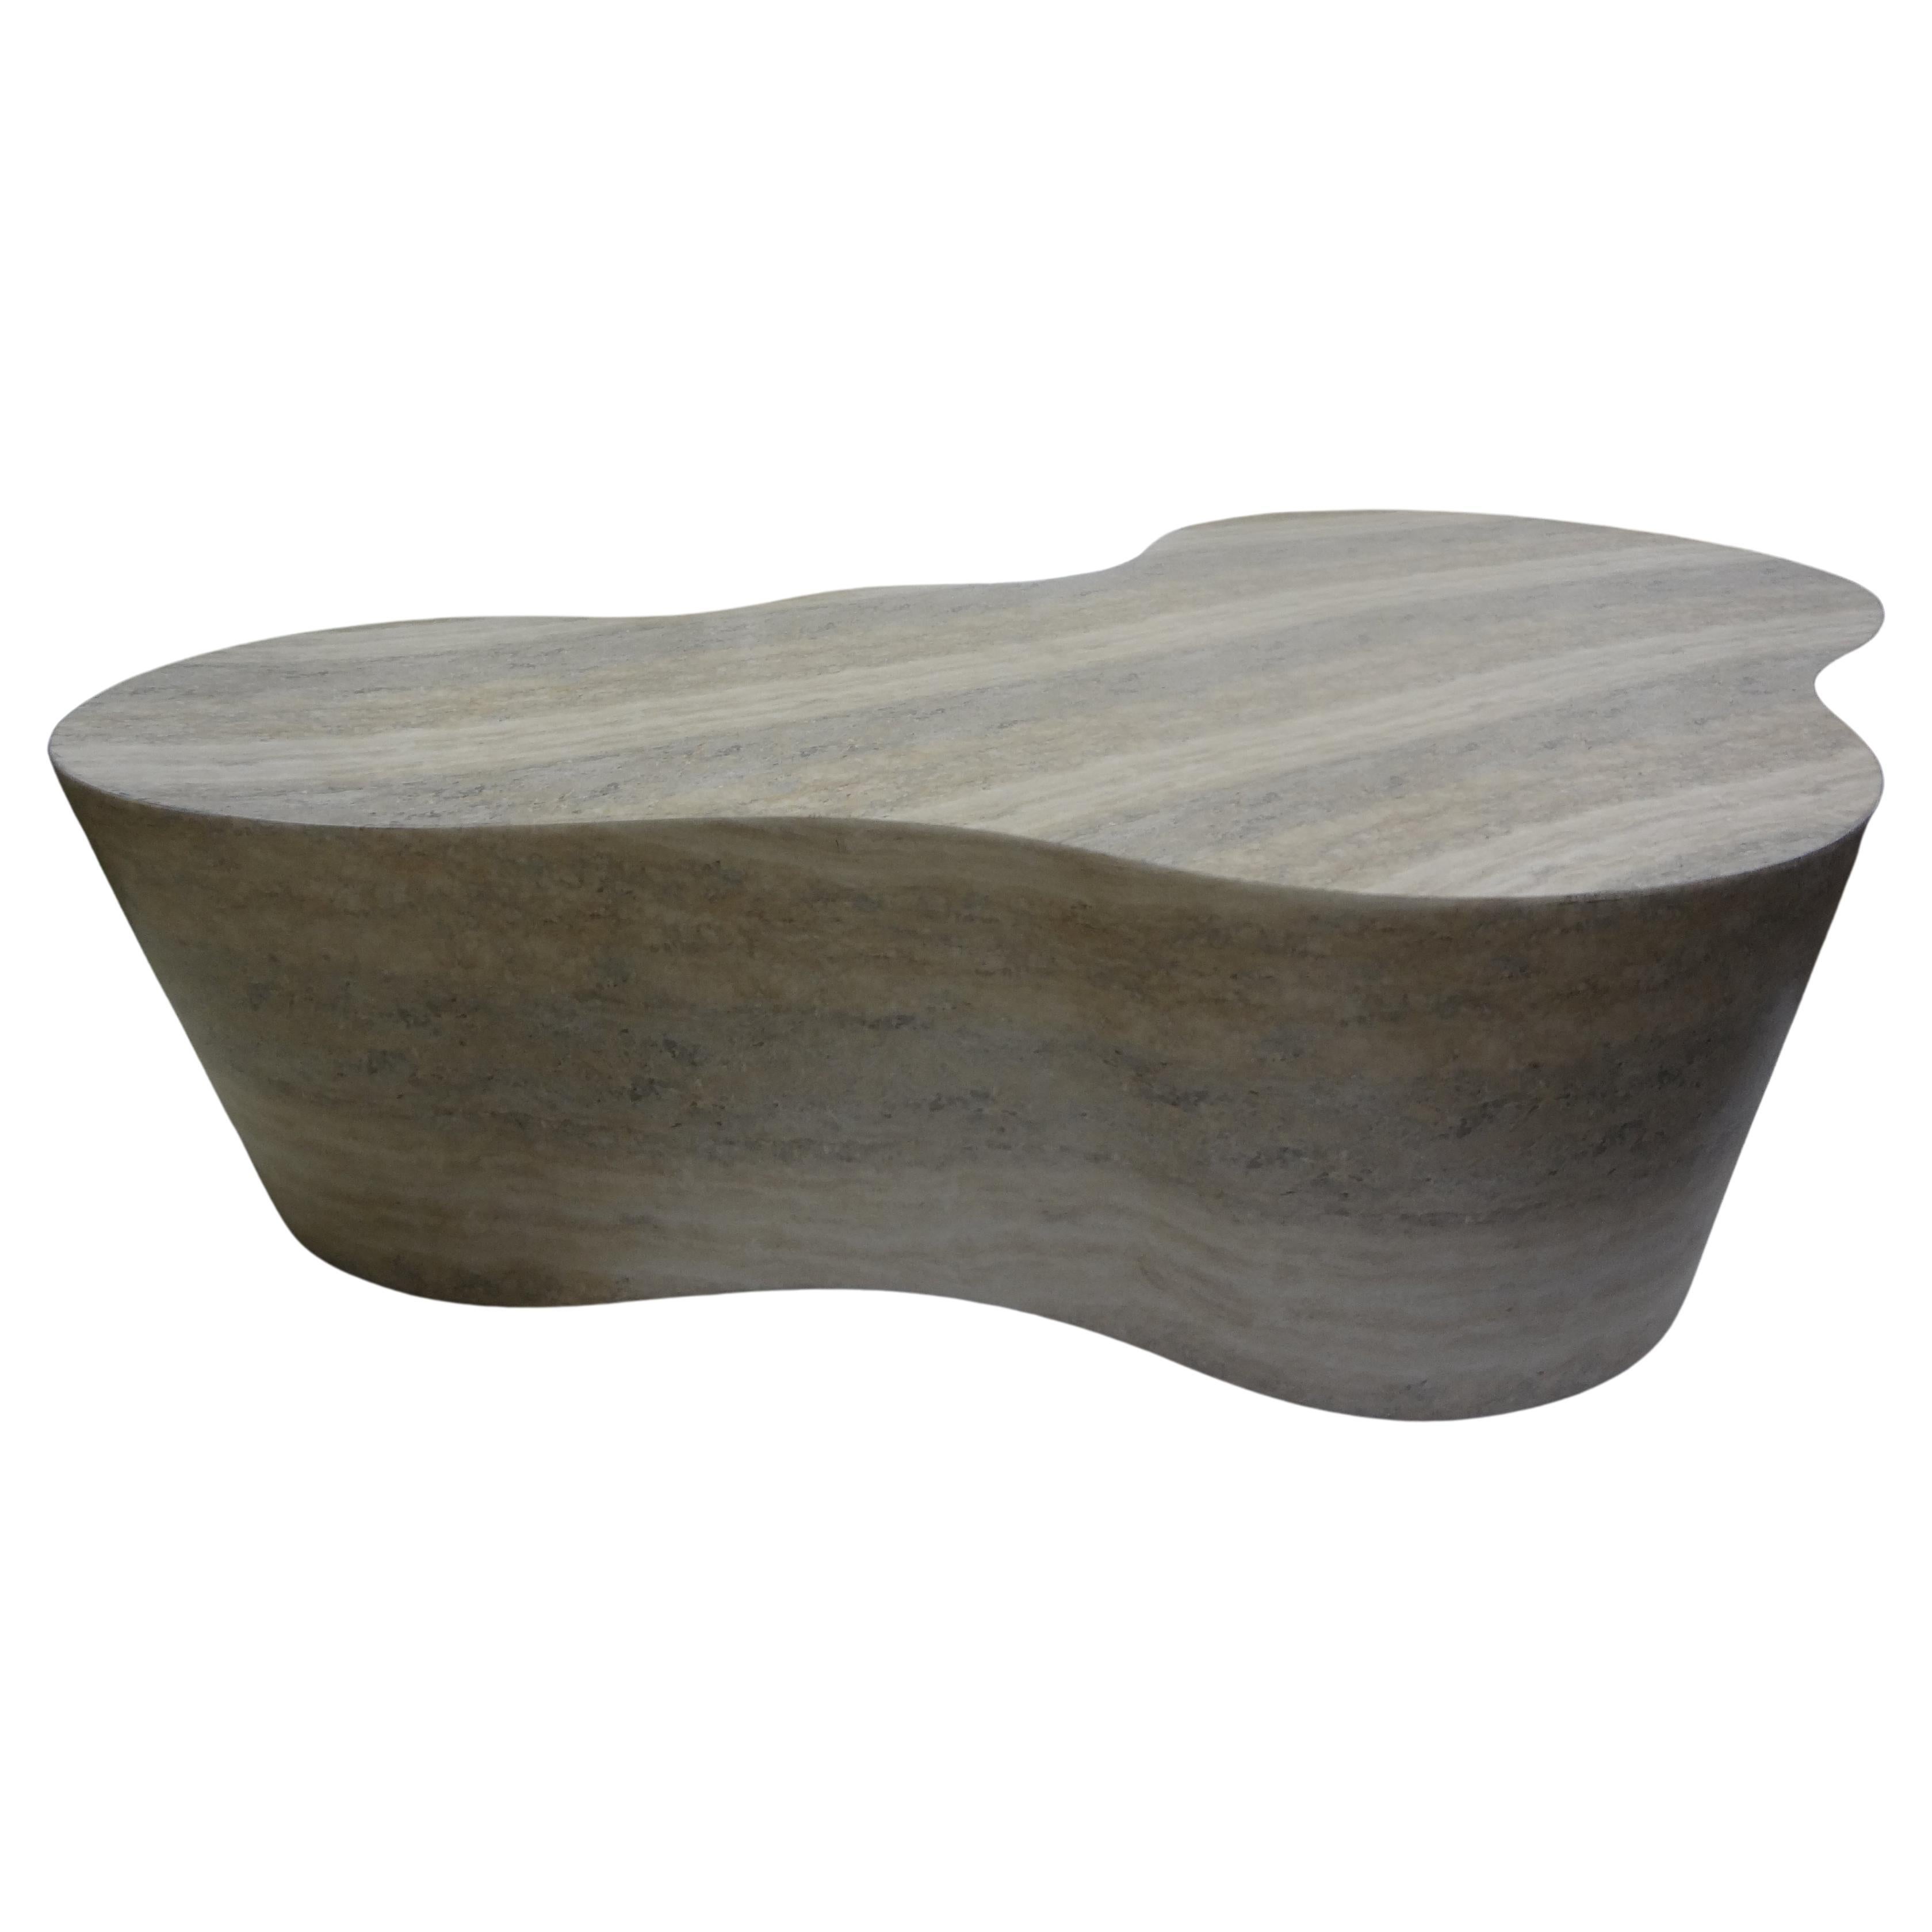 Italian Modern Karl Springer Style Travertine Free Form Coffee Table.
Beautifully designed Italian Modern travertine free form or amoeba coffee table or cocktail table. This shapely travertine table is versatile enough to be used in a variety of